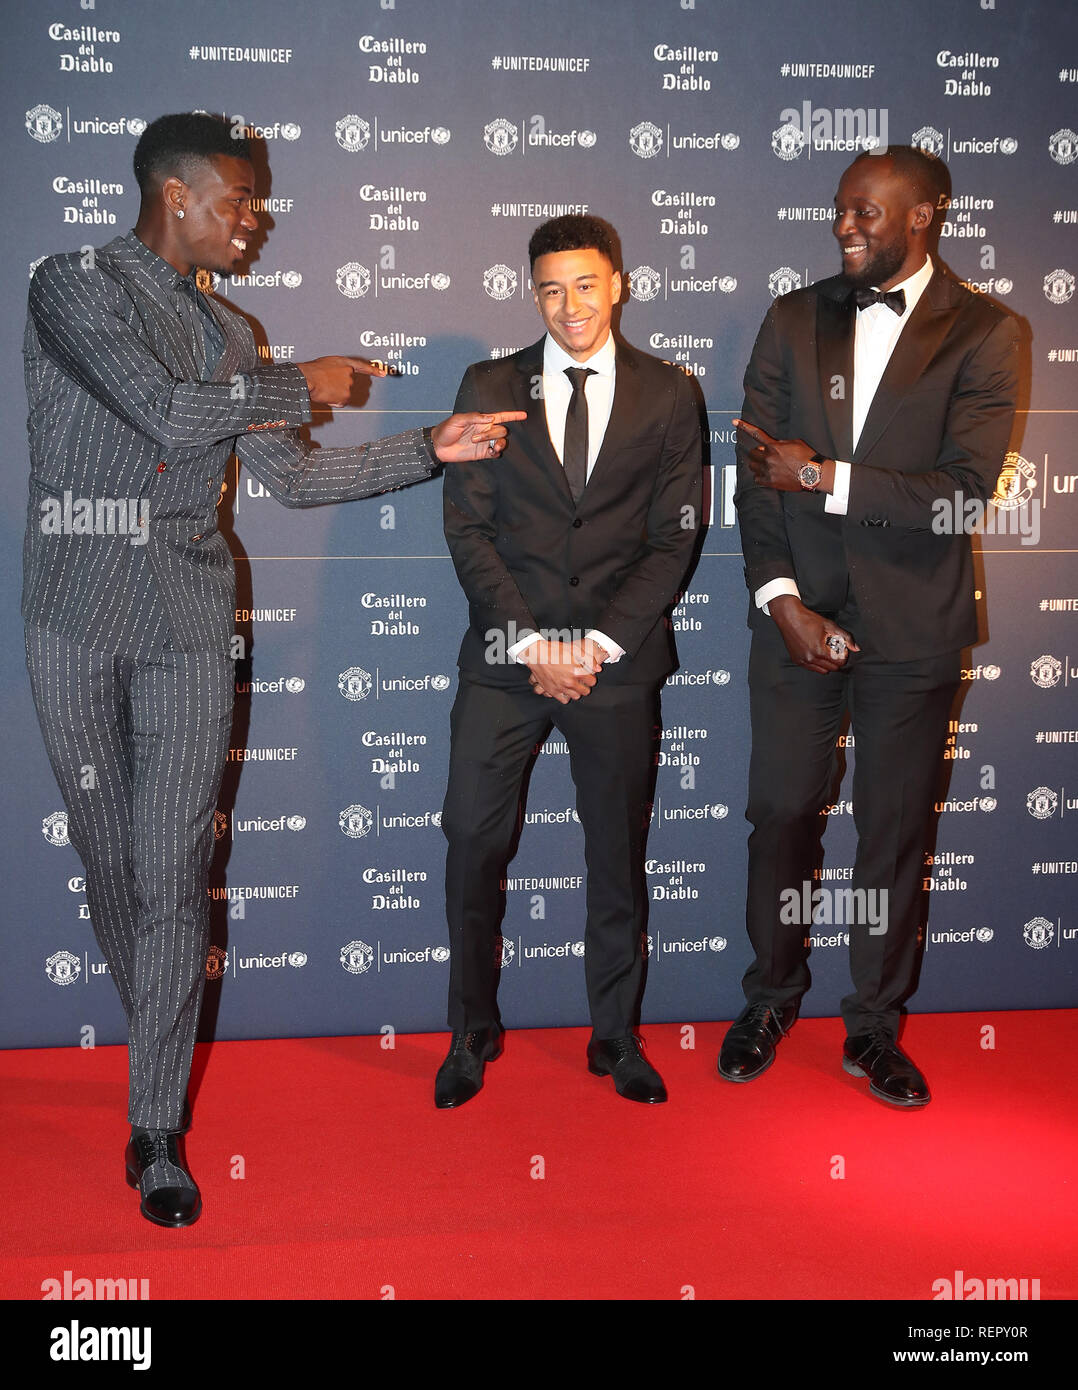 Paul Pogba (left), Jessie Lingard (centre) and Romelu Lukaku during the red  carpet arrivals for the Manchester United United for Unicef Gala Dinner at  Old Trafford, Manchester Stock Photo - Alamy